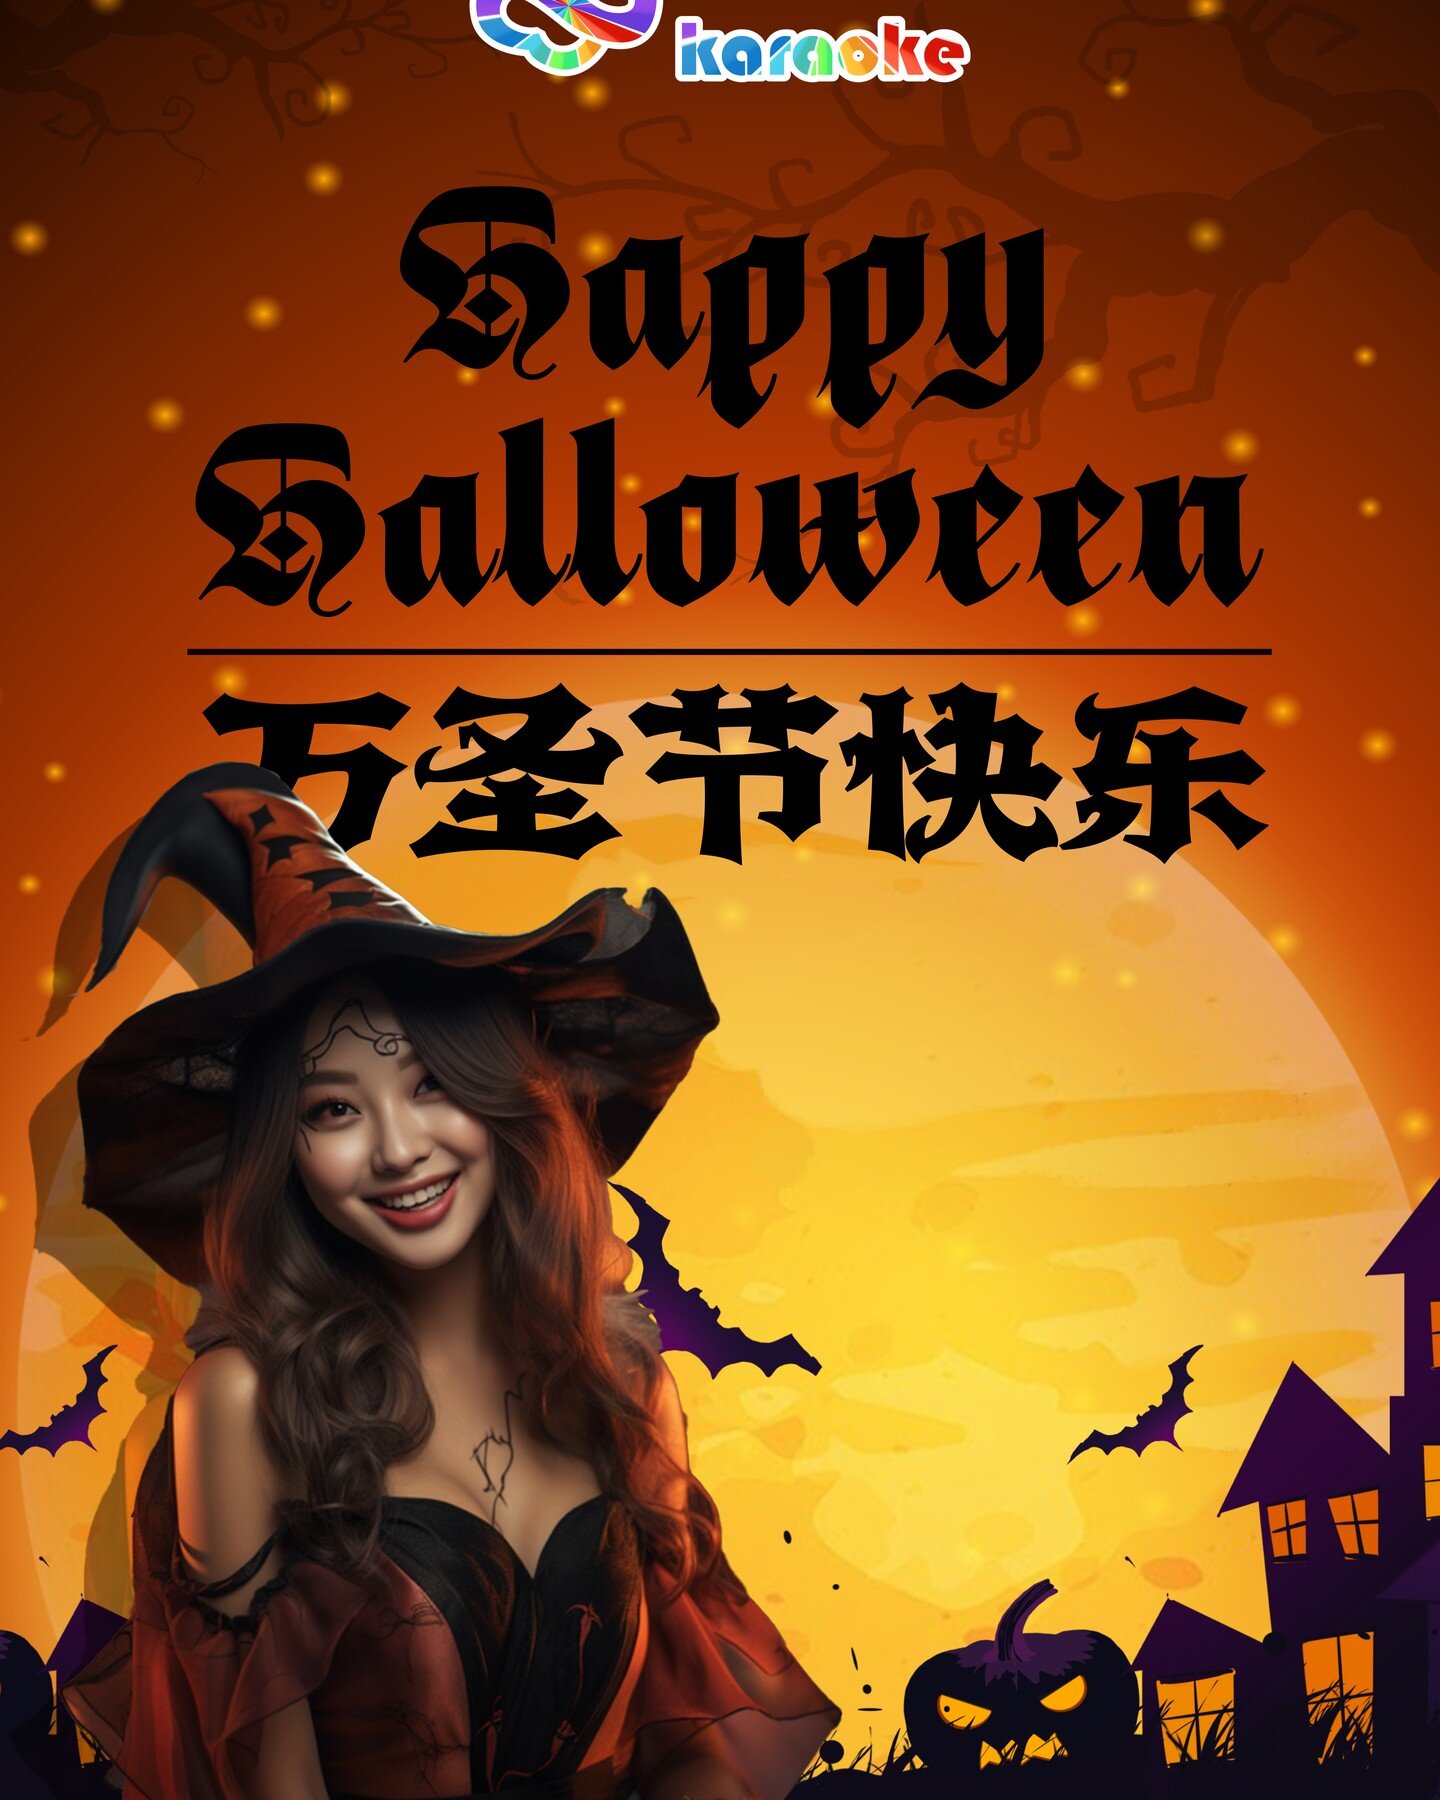 👻Wishing you a spooky Halloween, full of frights and delights! May your candy bag be overflowing and laughter fill the night. Have a ghoulishly good time and a delightfully scary night🎃
#cloud8 #cloud8ktv #cloud8karaoke #halloween #brisbane #brisba